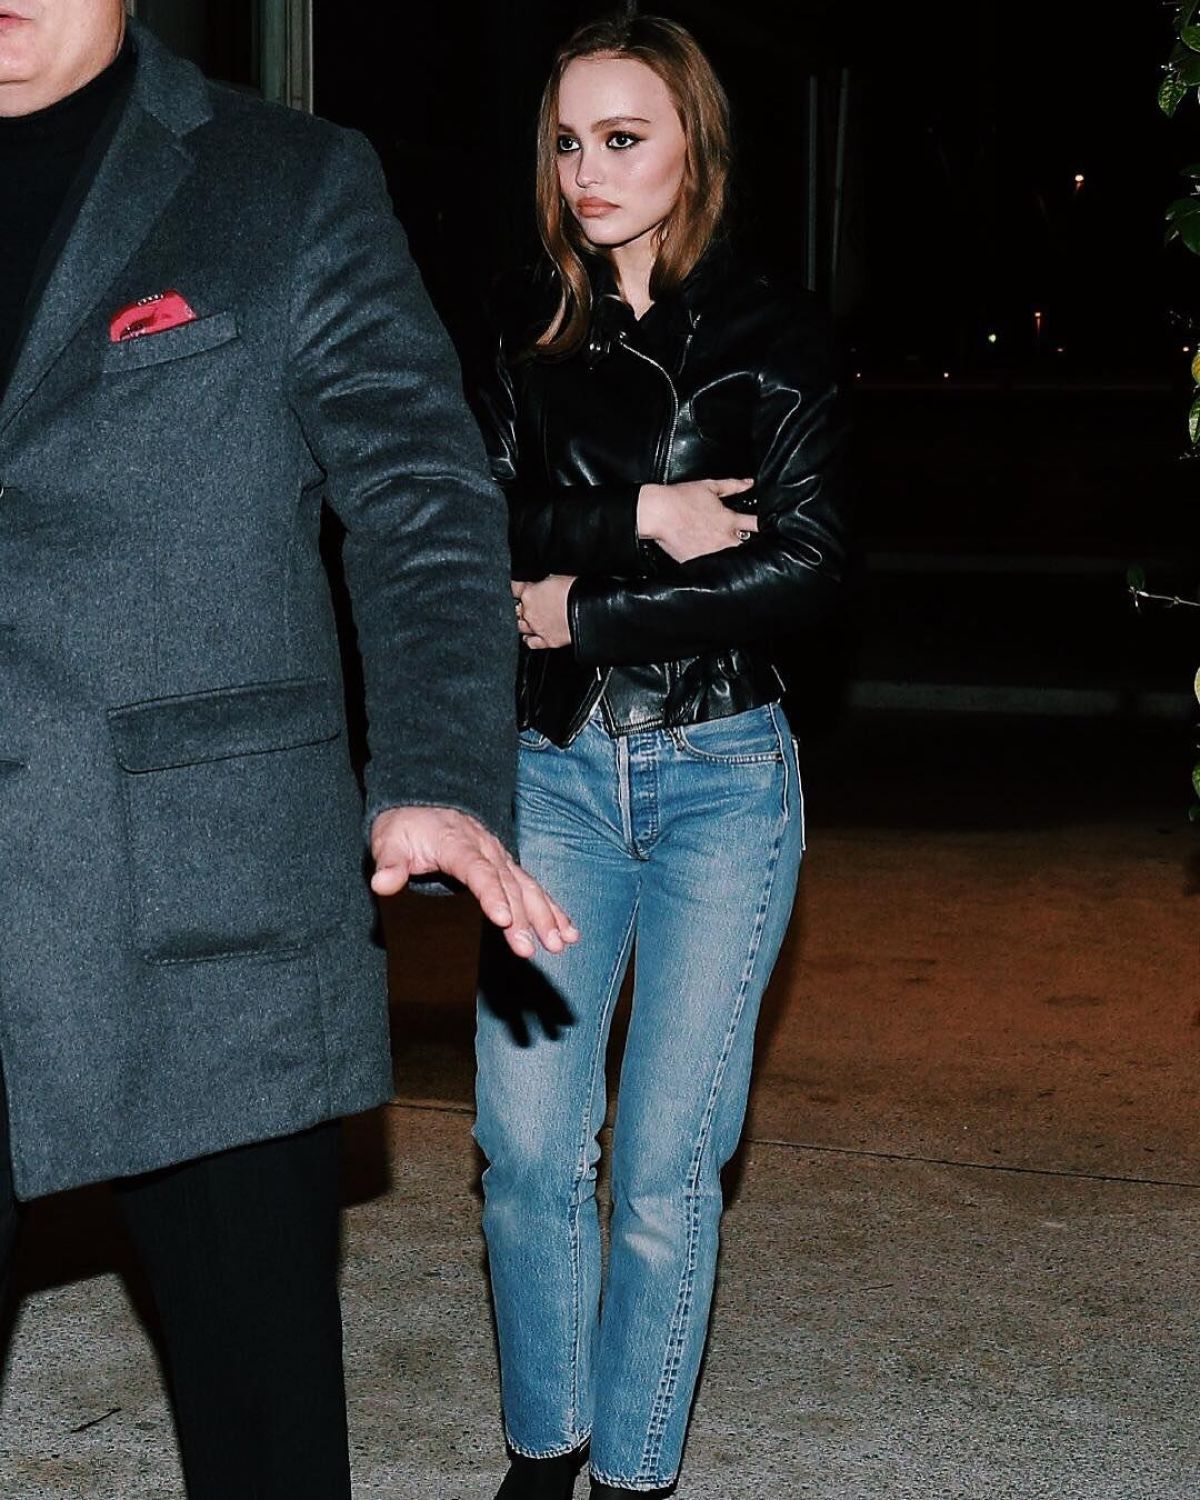 LILY-ROSE DEPP in Denim Out in Paris 12/17/2018 – HawtCelebs